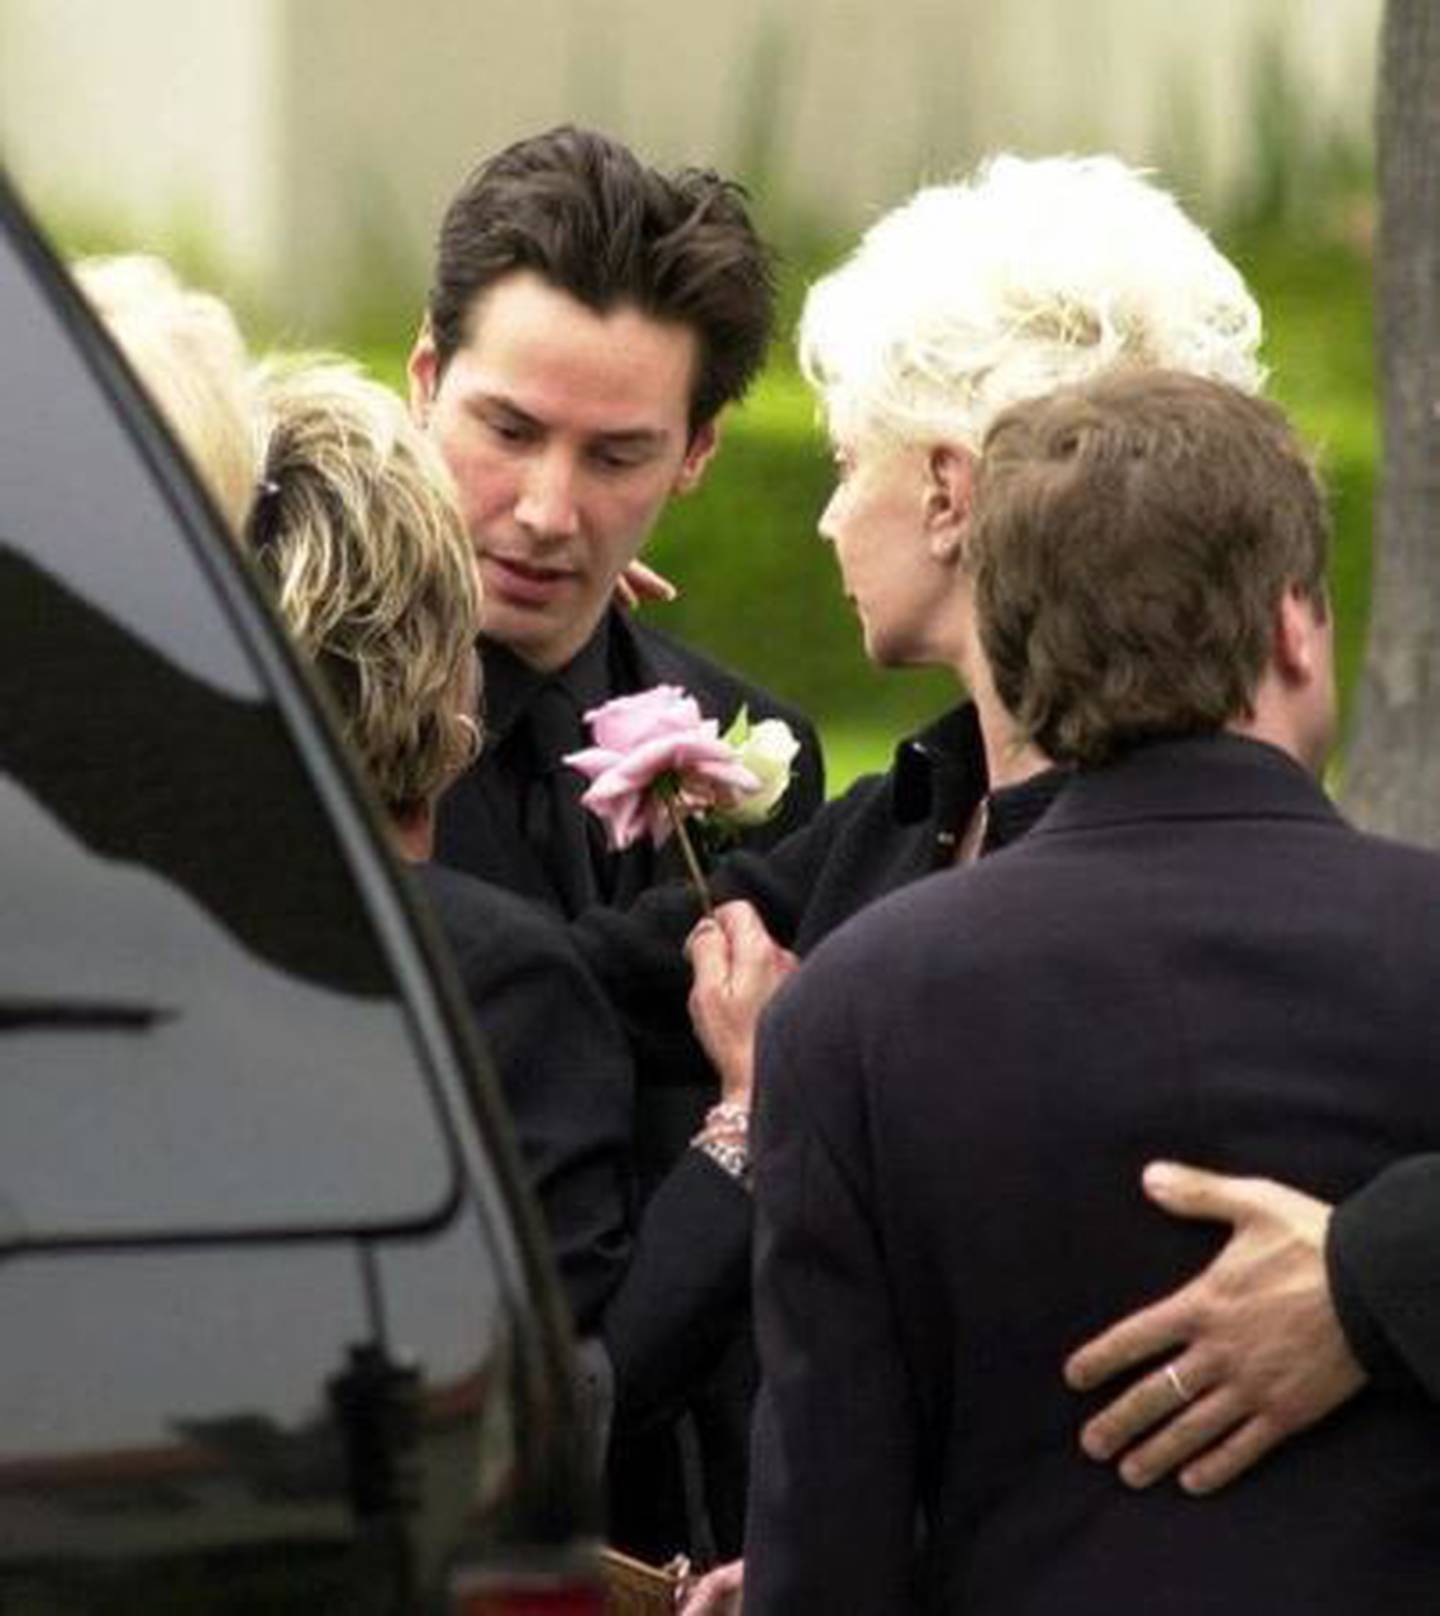 Keanu Reeves at the funeral of his partner Jennifer Syme who was killed in road accident. Photo / News Limited